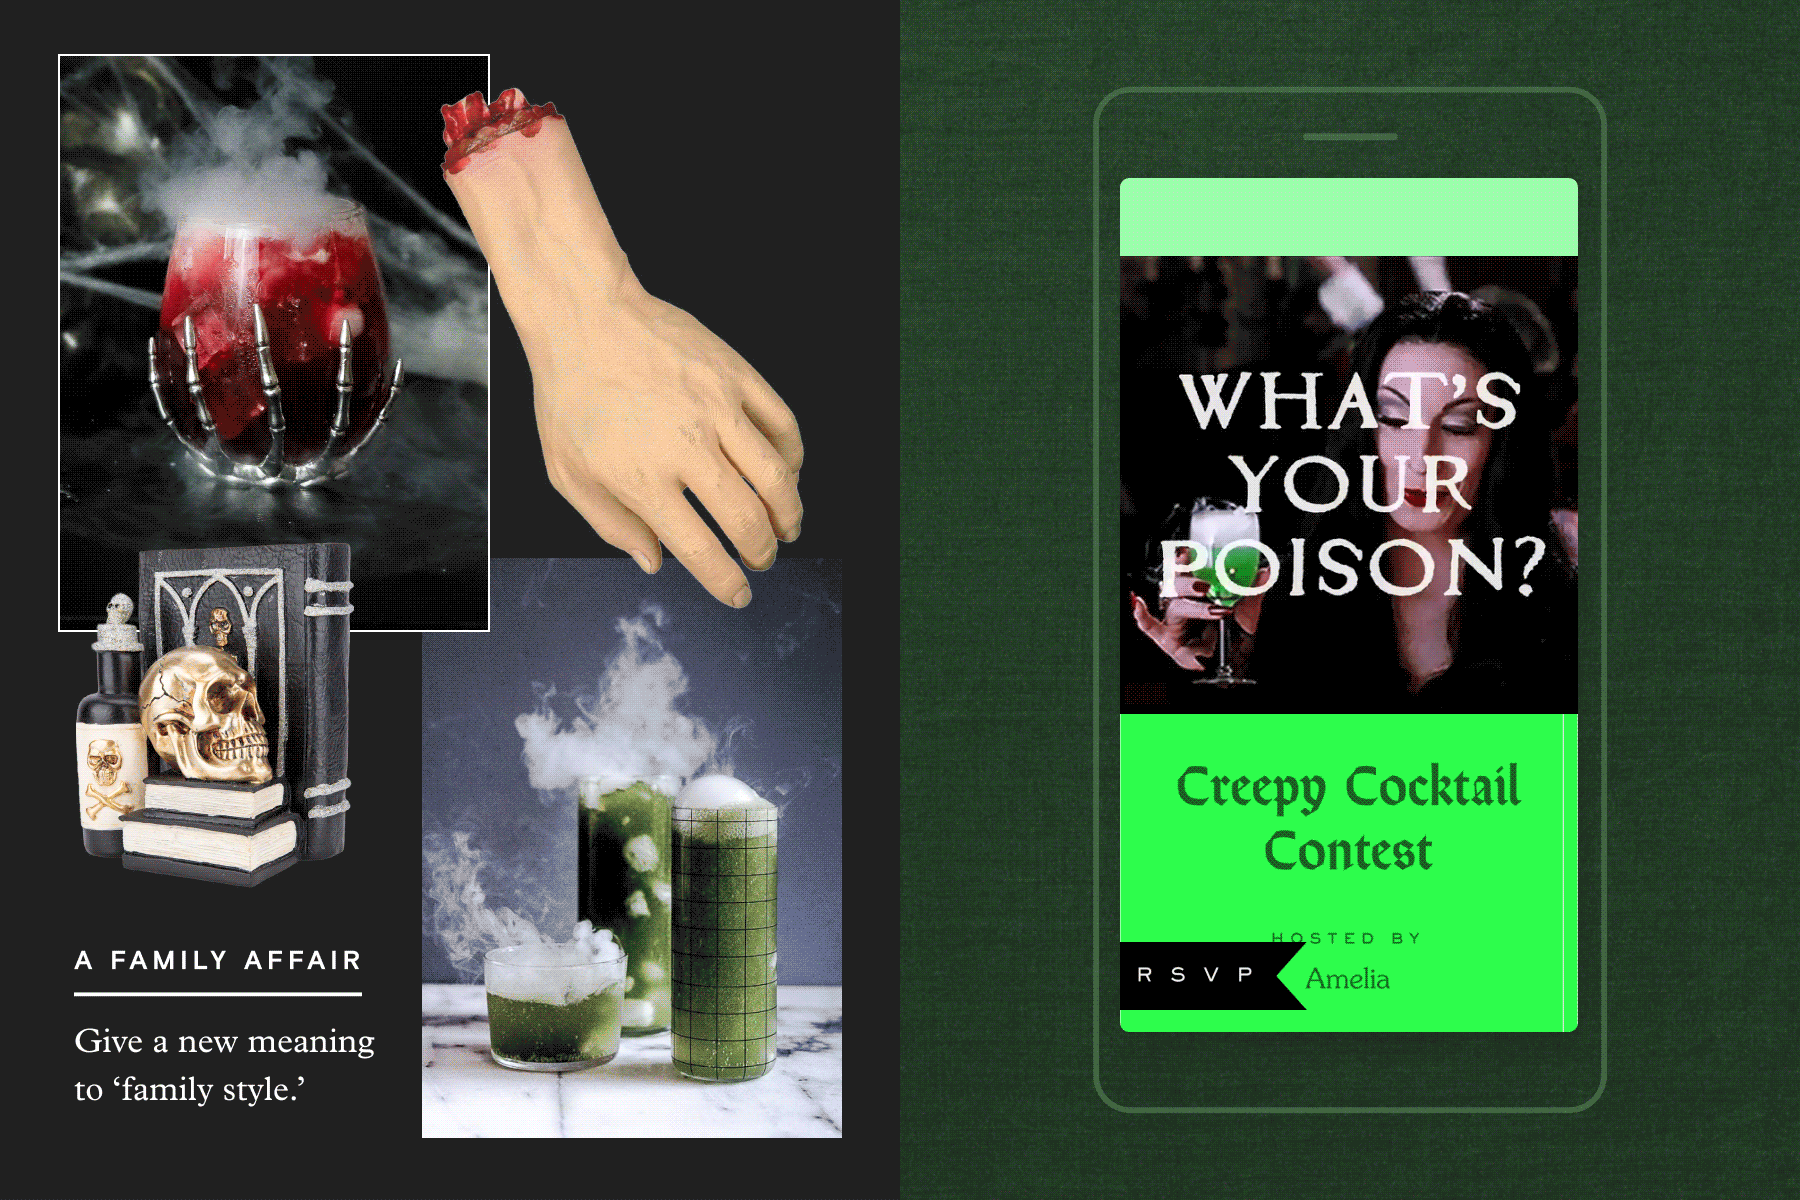 From left: Blood-red cocktail with dry ice, Halloween home decor including a skull and bottle of poison, a fake severed hand, 3 green cocktails with dry ice, a digital invite with Morticia from the Addams family holding a cocktail with the text “What’s Your Poison?” overlaid.